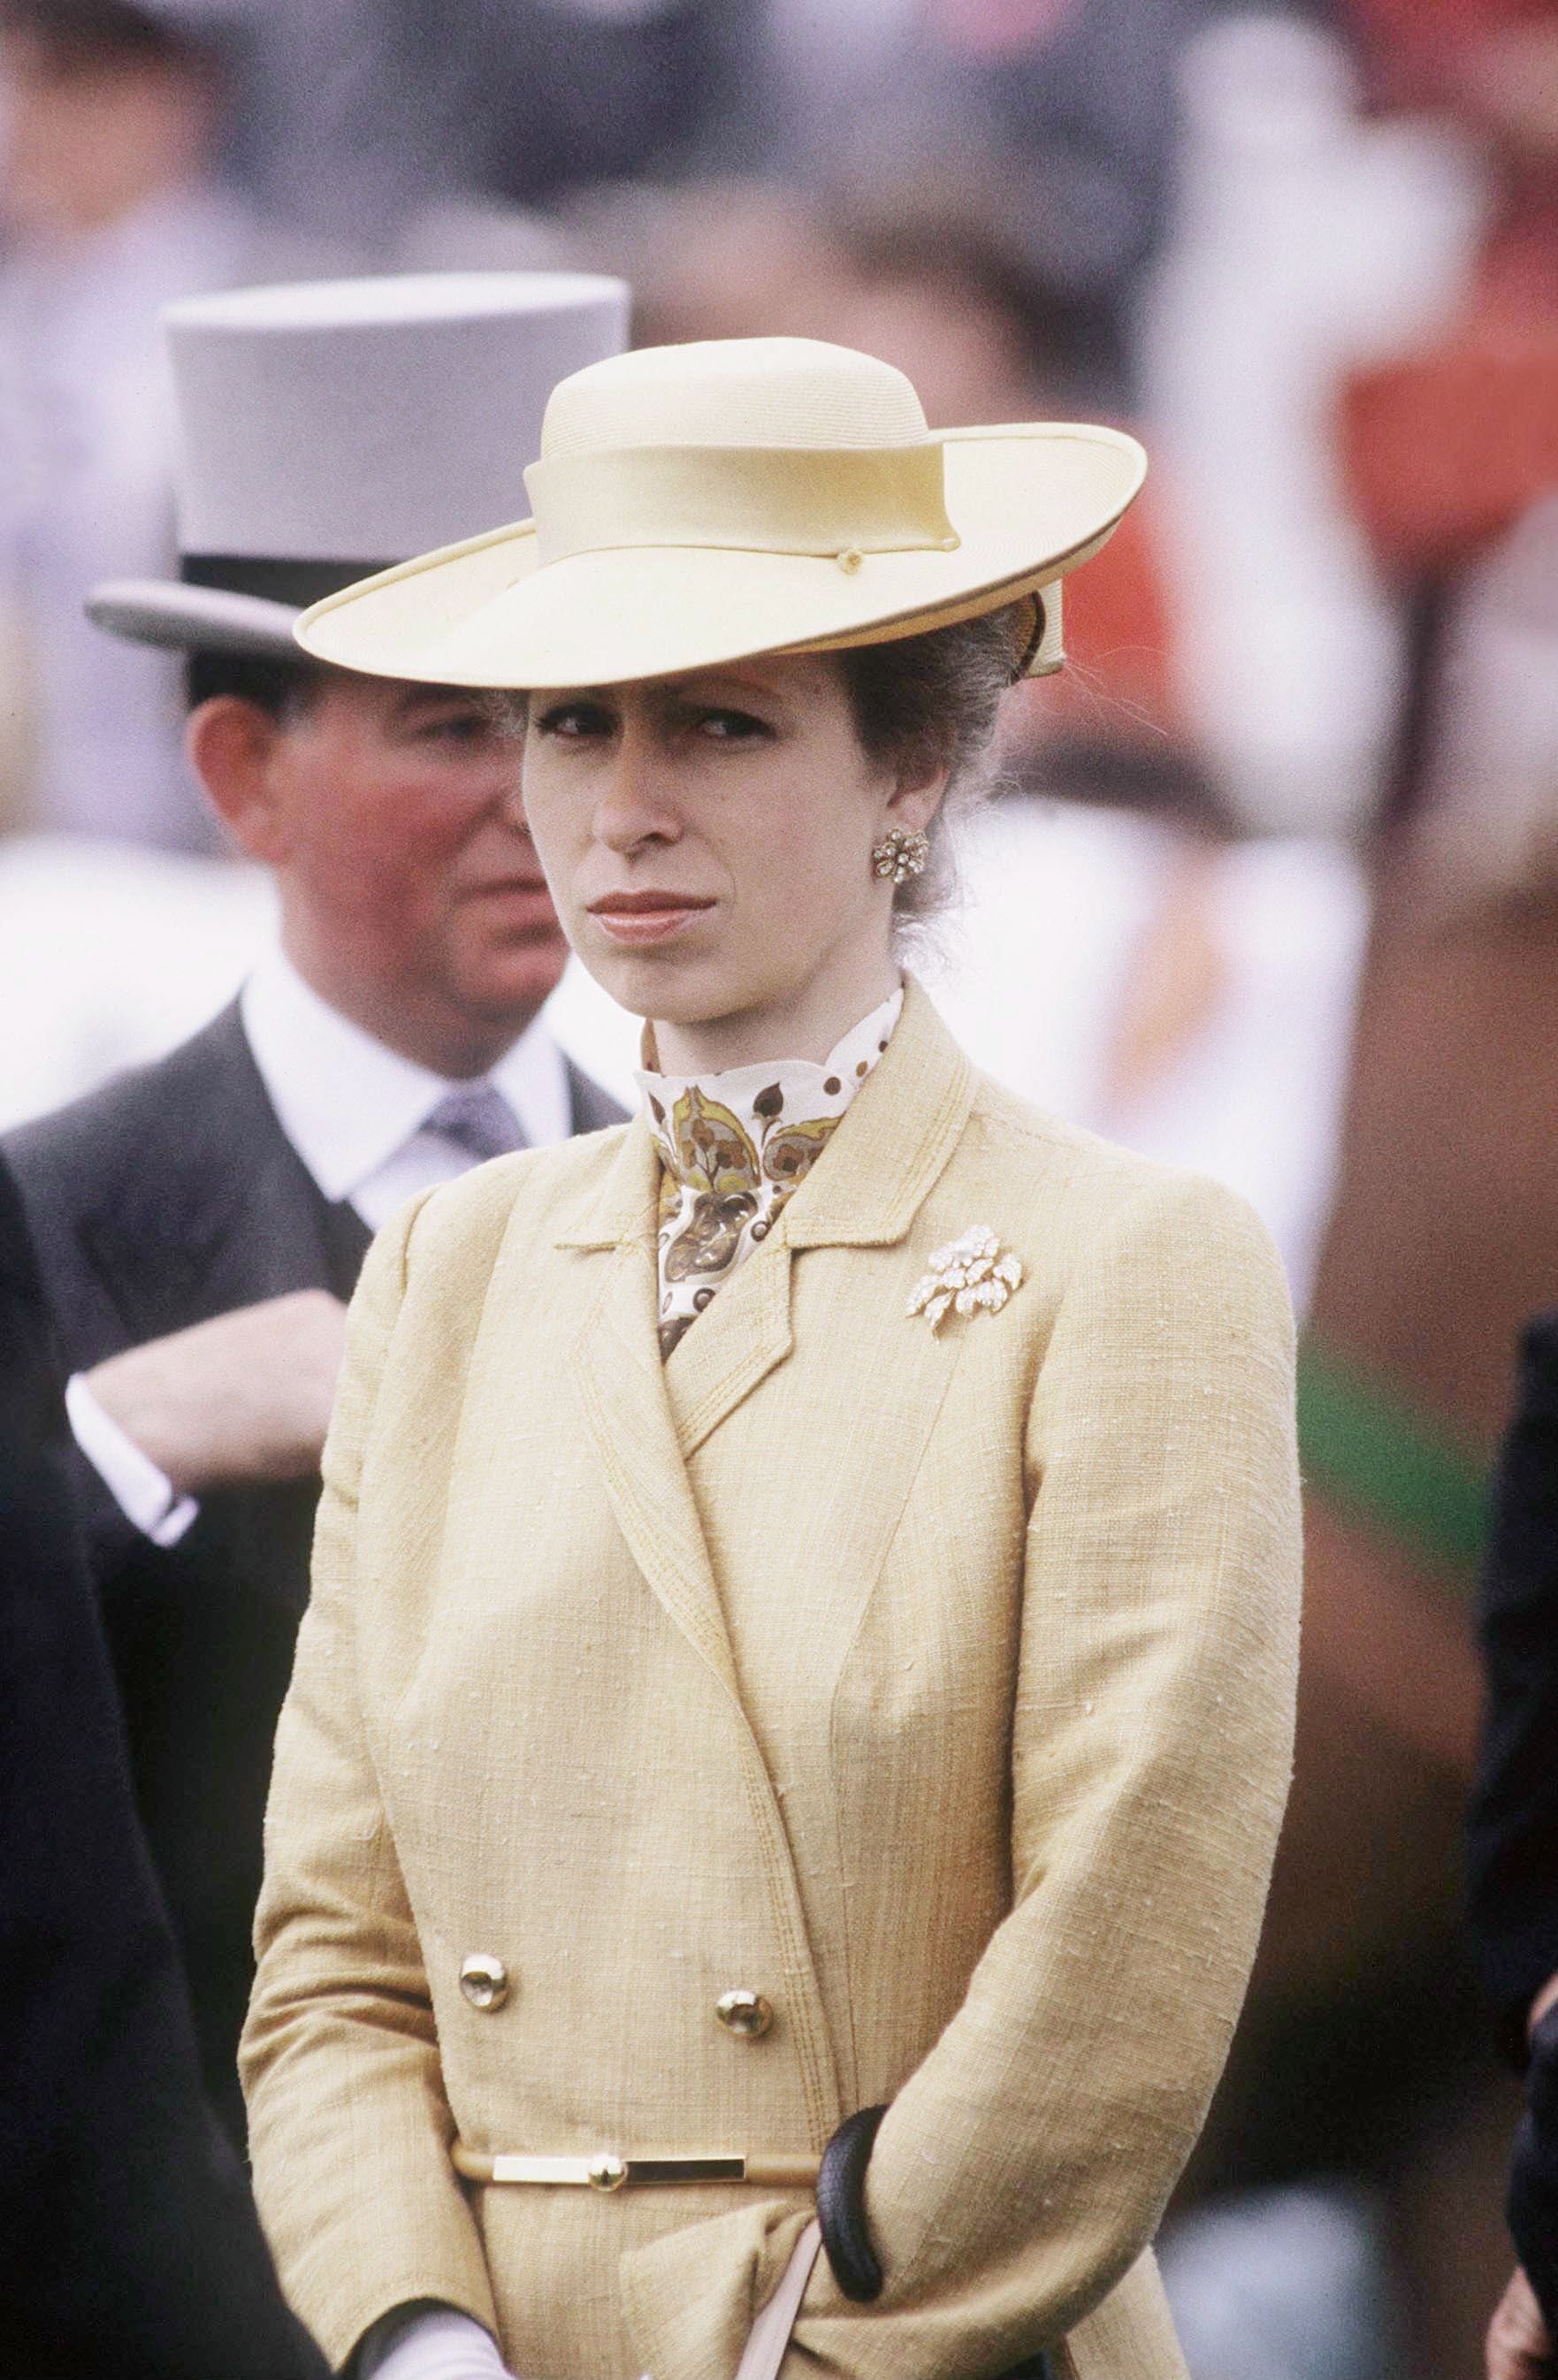 Princess Anne at The Derby on June 1, 1983, in Epsom, United Kingdom. | Source: Tim Graham Photo Library/Getty Images